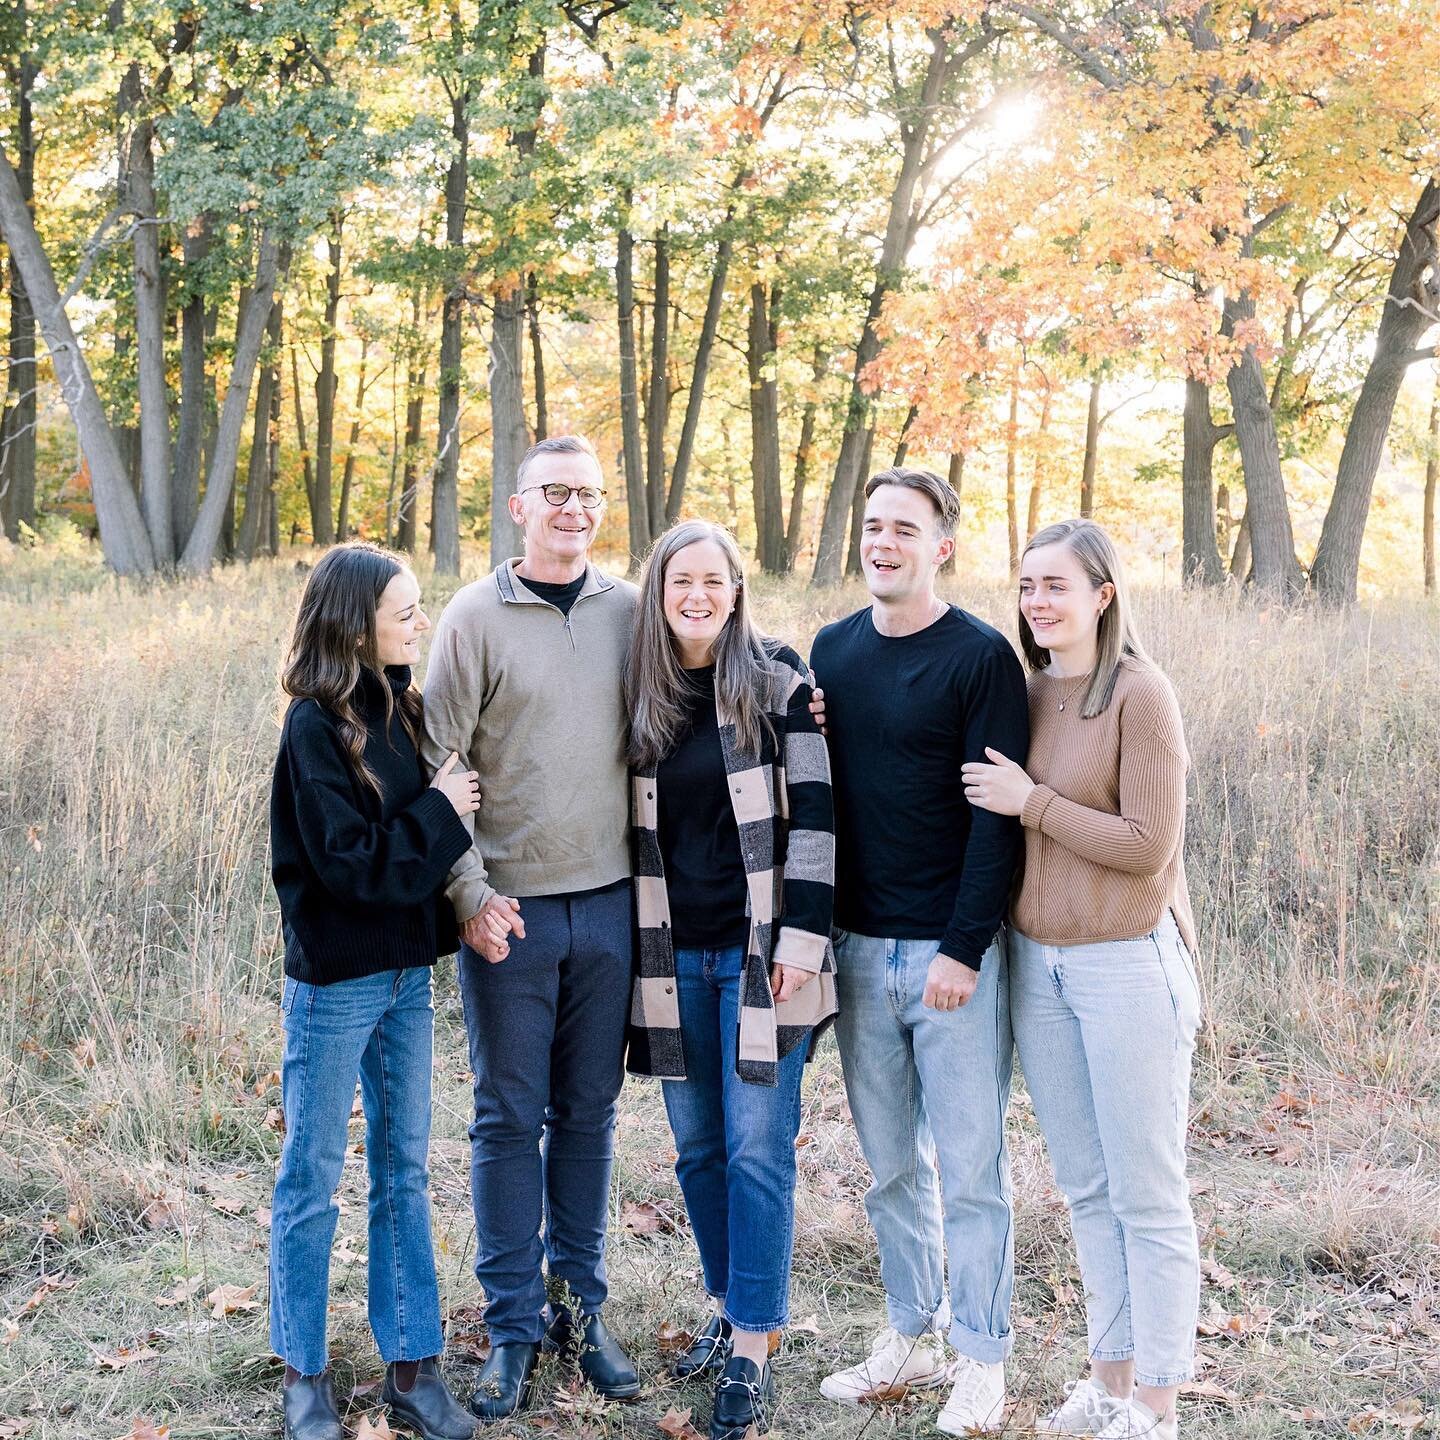 The Holton Family 🥰&hellip; I was so excited to be a part of Anne&rsquo;s birthday present this year! Family photos are such a great gift! &hearts;️